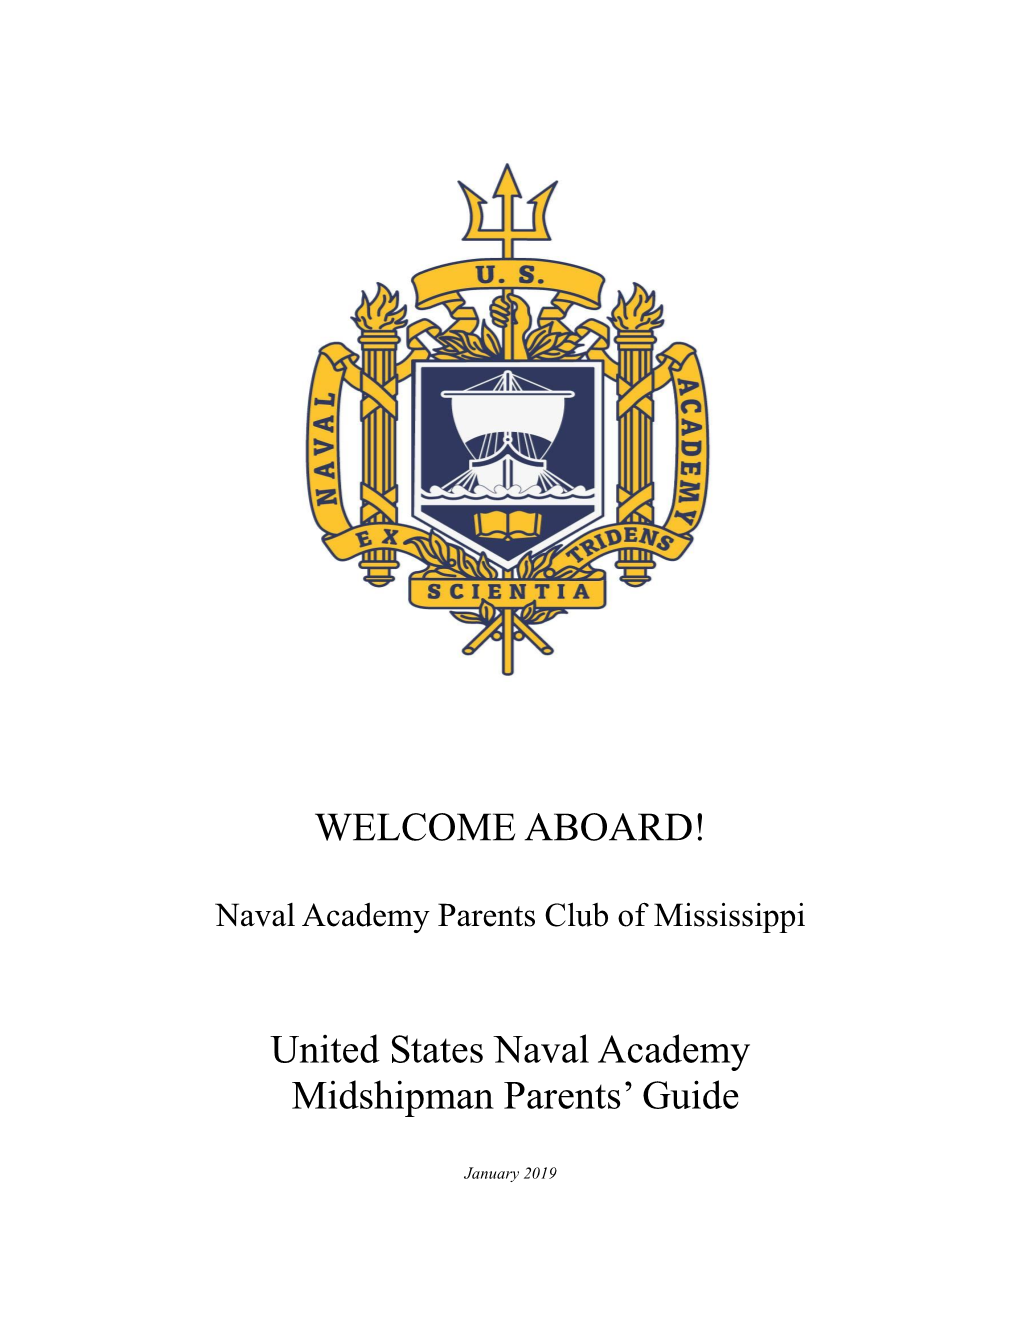 ABOARD! United States Naval Academy Midshipman Parents' Guide